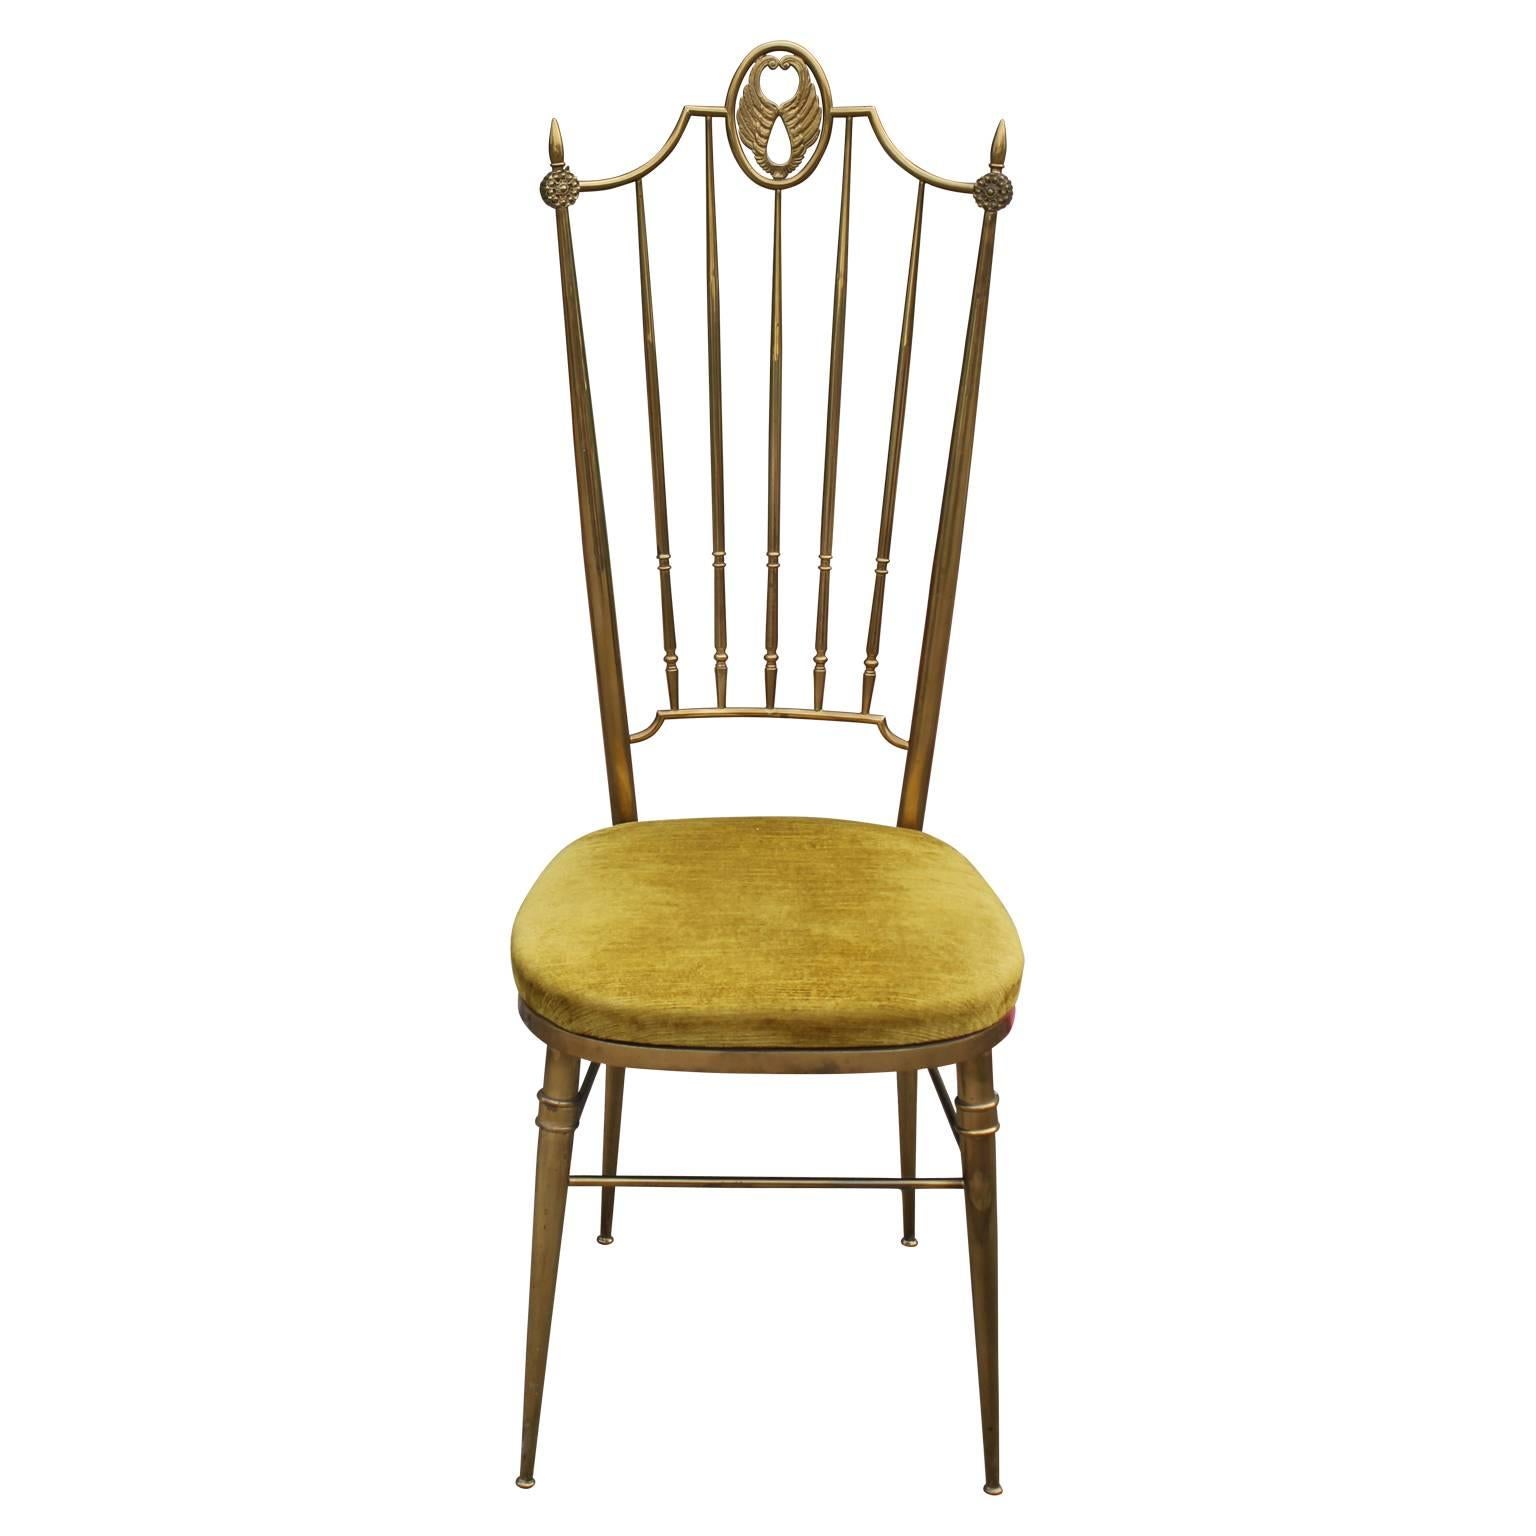 Stunning pair of Hollywood Regency brass and yellow velvet highback chairs. The feature solid brass construction circa 1960. In excellent vintage condition ready to go. Wonderful feature chairs for luxe room.